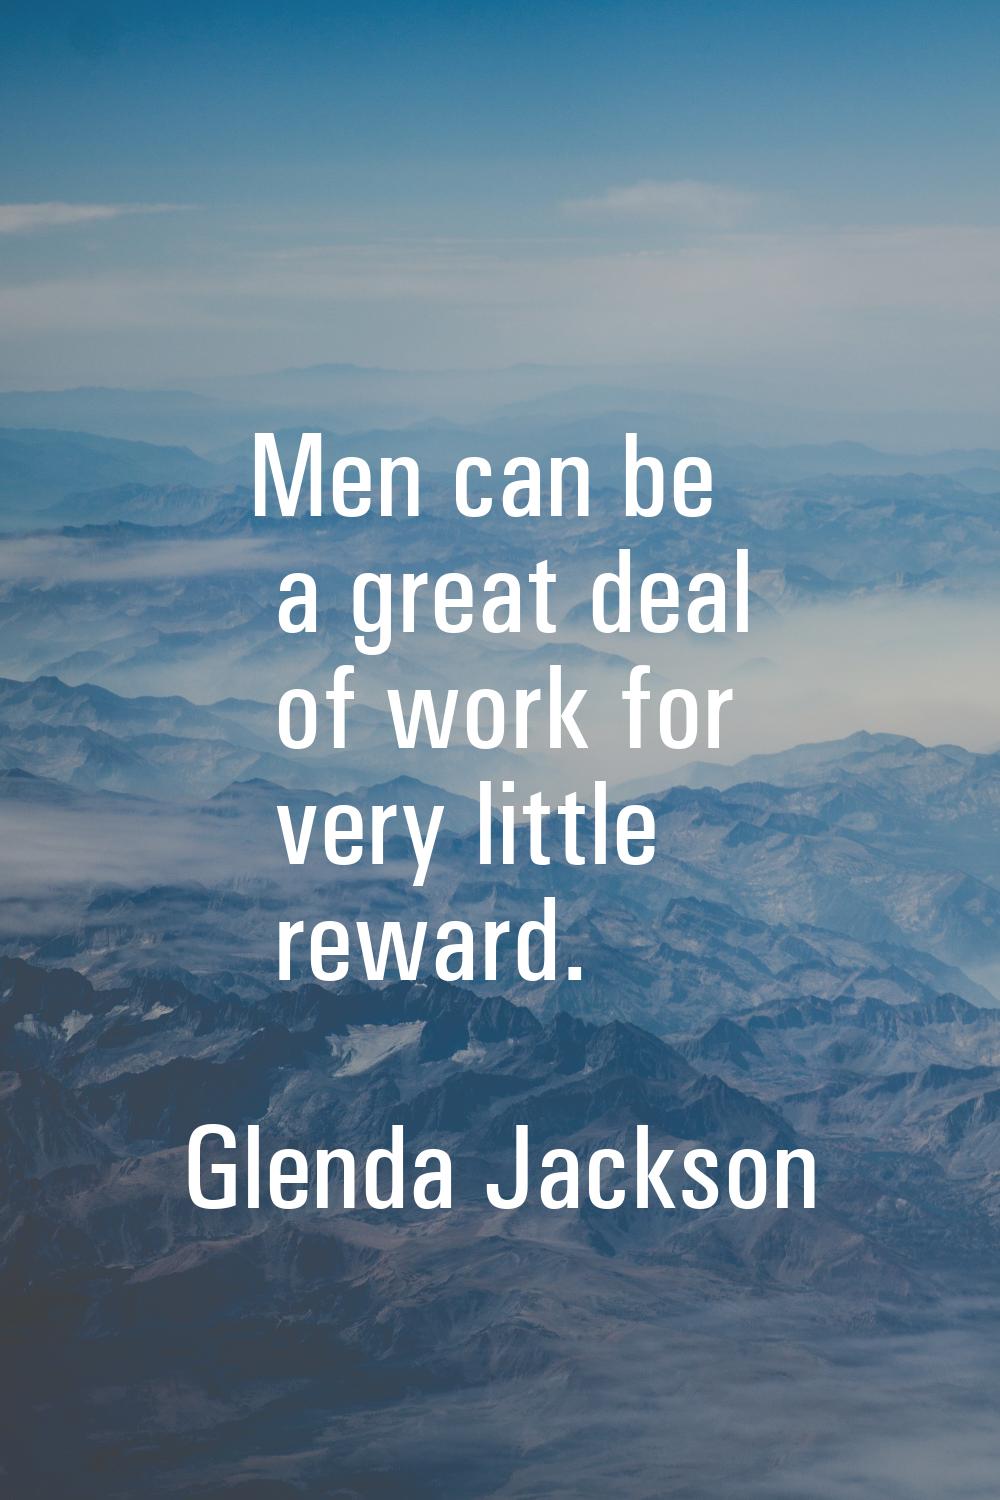 Men can be a great deal of work for very little reward.